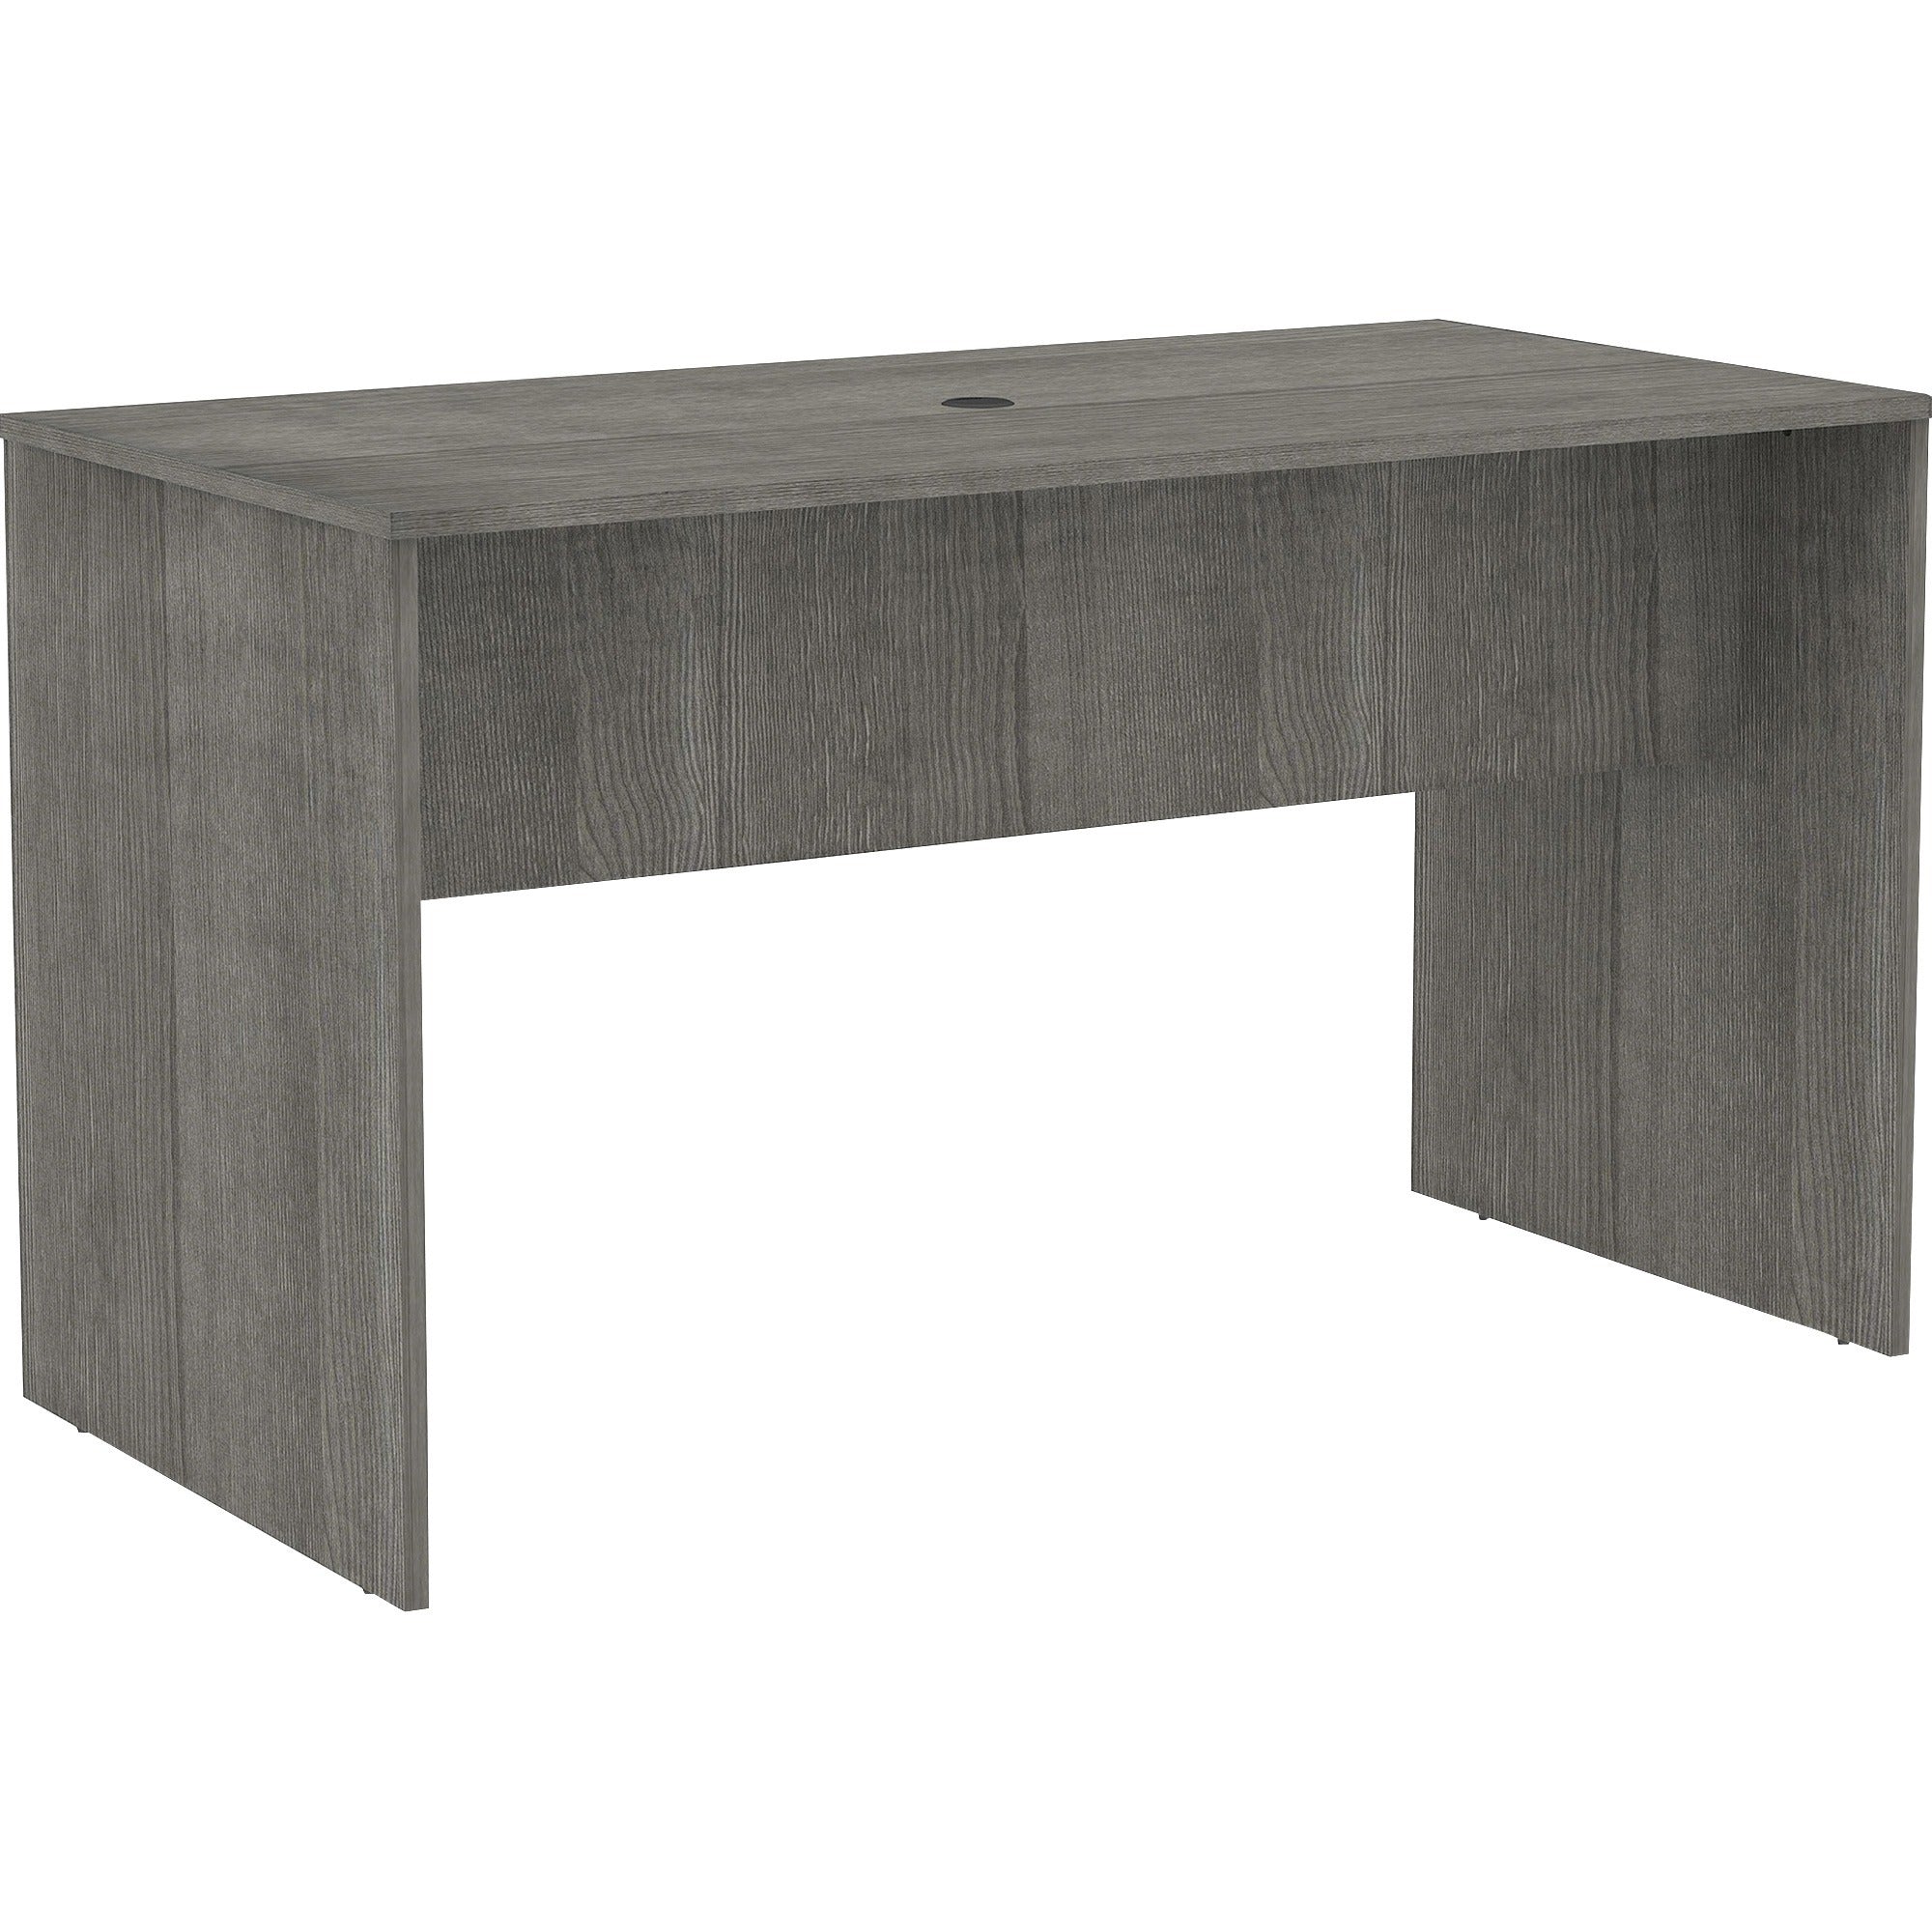 lorell-essentials-series-standing-height-table-72-x-36413-band-edge_llr69662 - 1